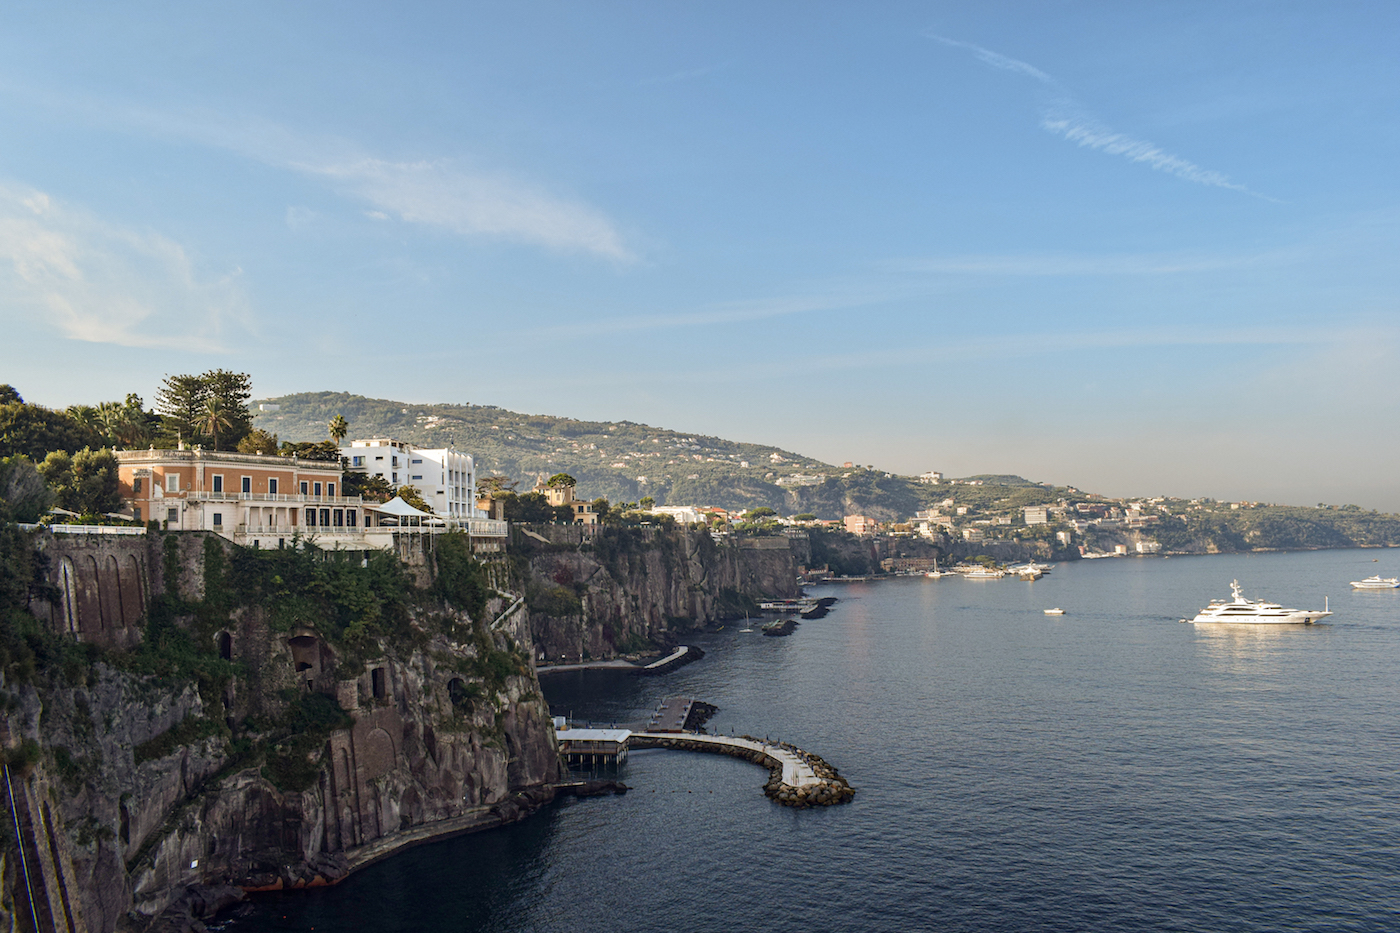 Views from Hotel Parco dei Principi in Sorrento. Courtesy of the hotel.